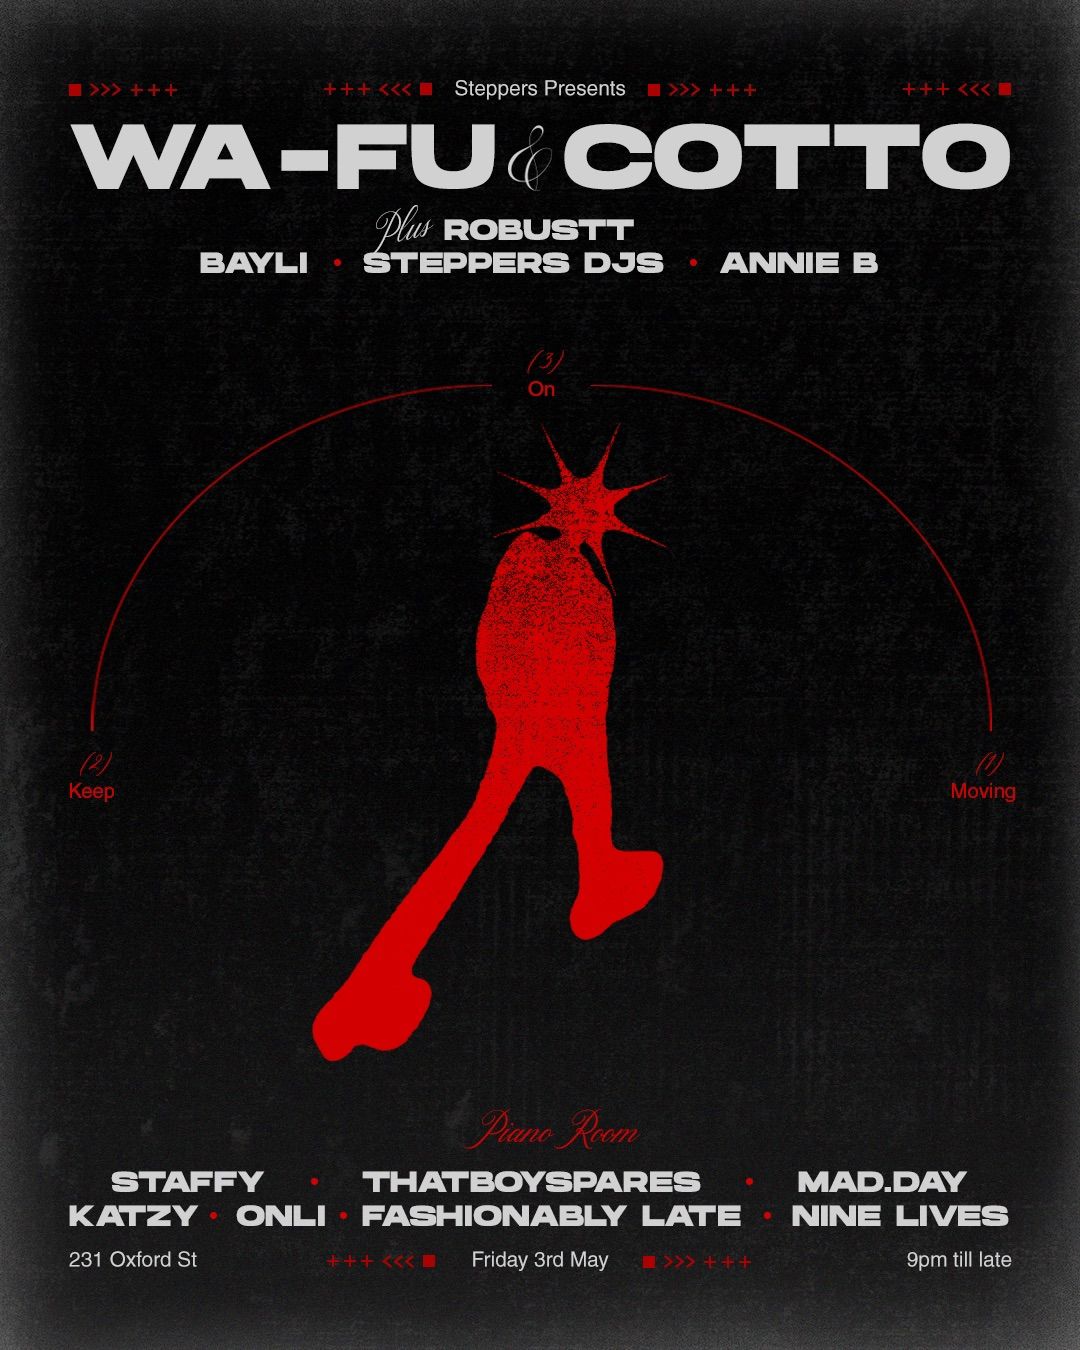 Steppers Home Coming ft. WA-FU, Cotto, Robustt & More